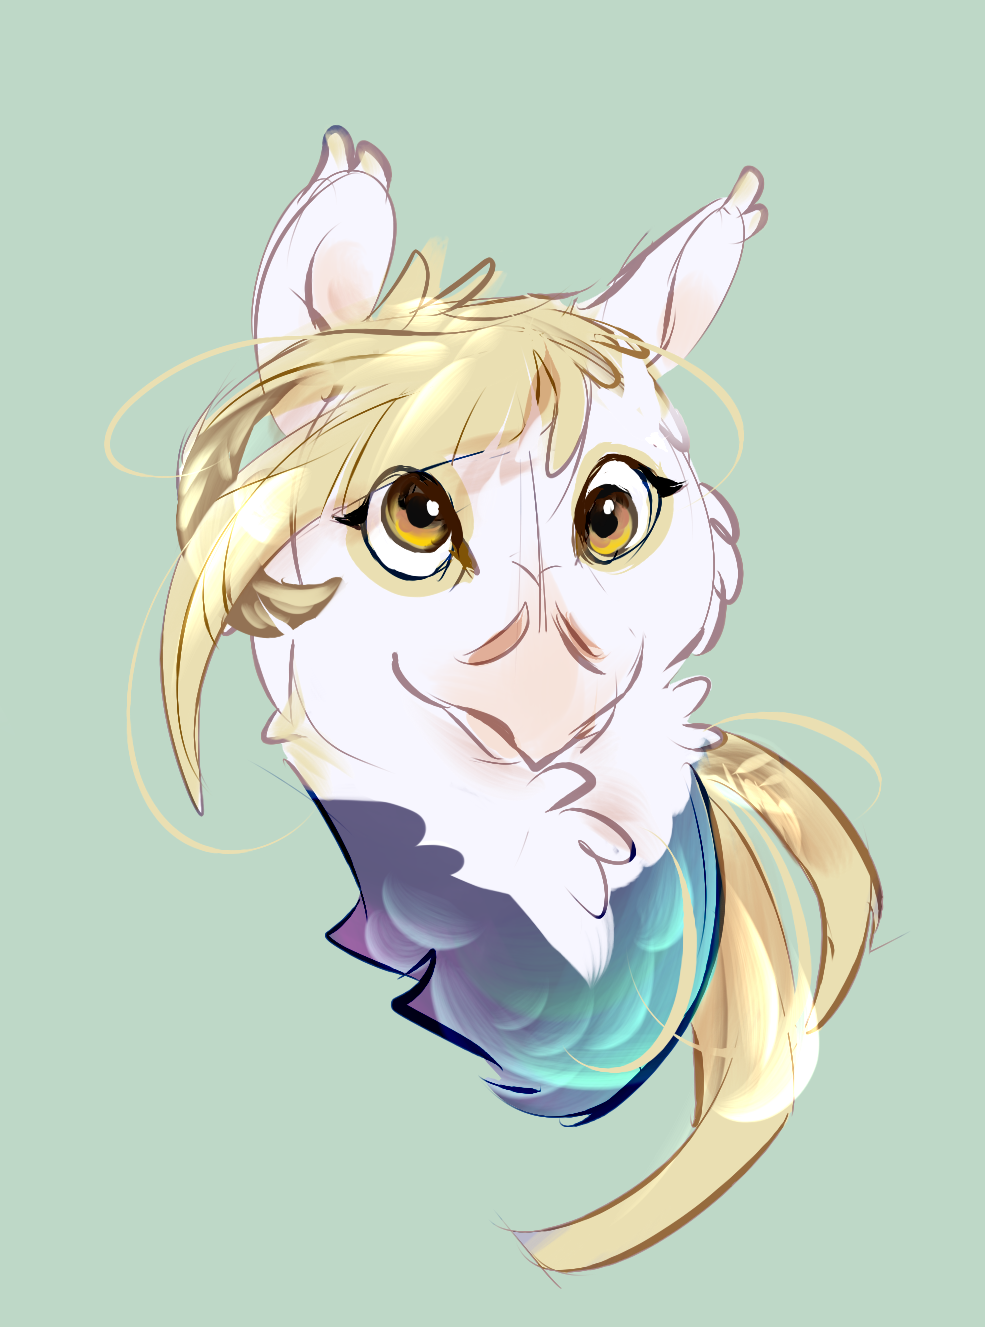 A headshot of the pegasus, facing forward. Her yellow-brown eyes are looking in different directions. She has a bright smile and alert ears.